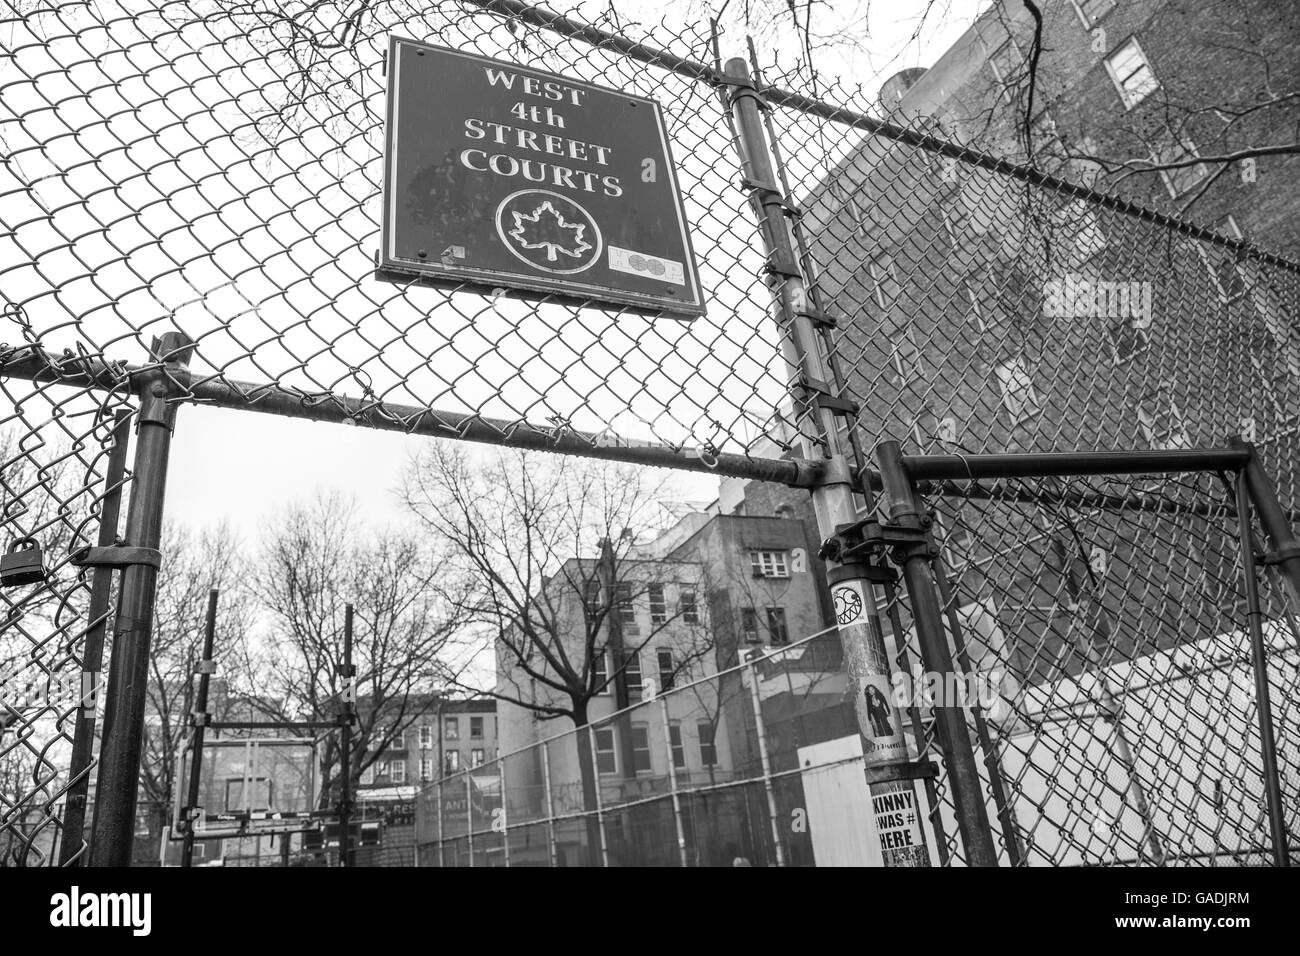 The West 4th Street Court, known as 'The Cage'. Street-ball famous place in New York City, South Manhattan Stock Photo